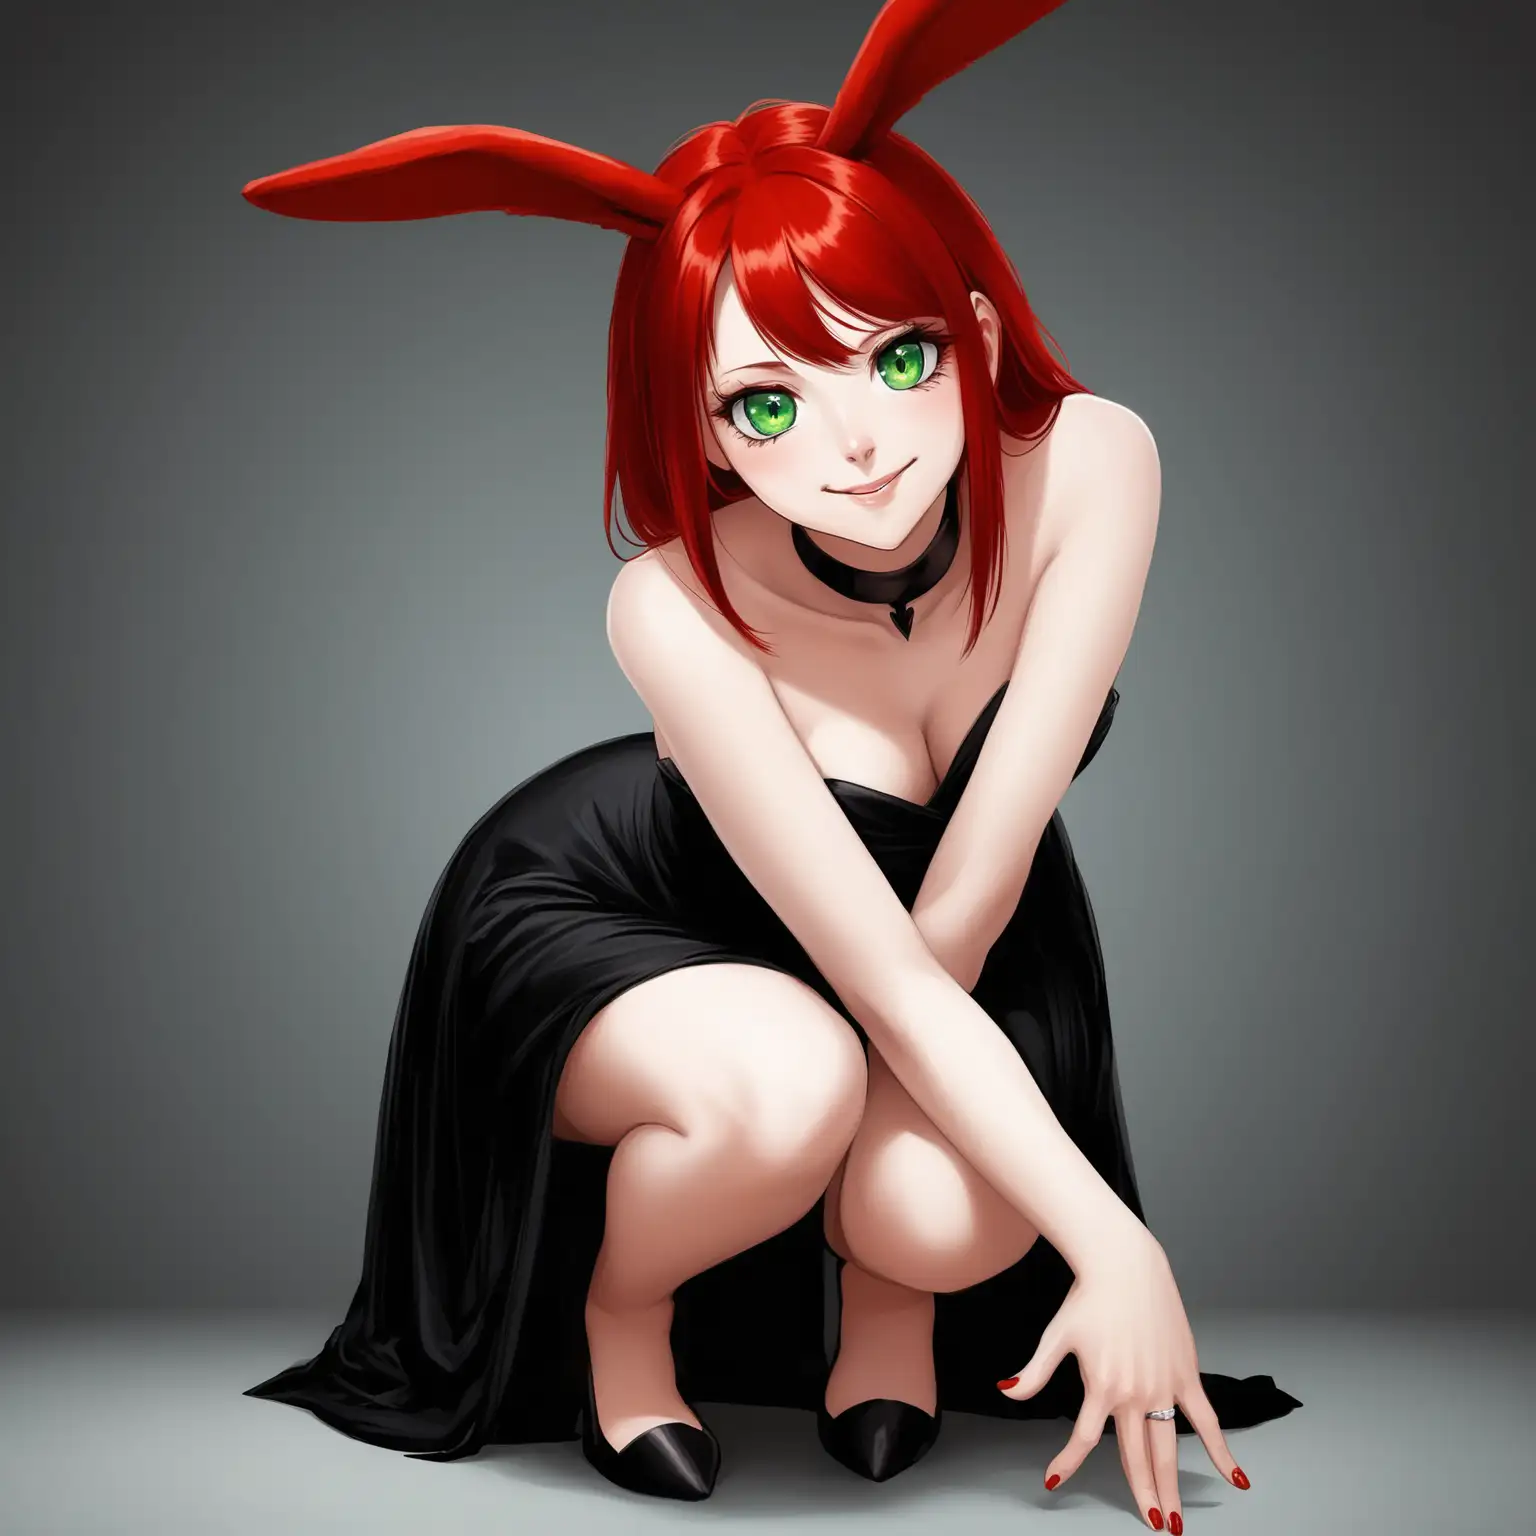 Seductive-RedHaired-Girl-in-Provocative-Black-Dress-with-Rabbit-Ears